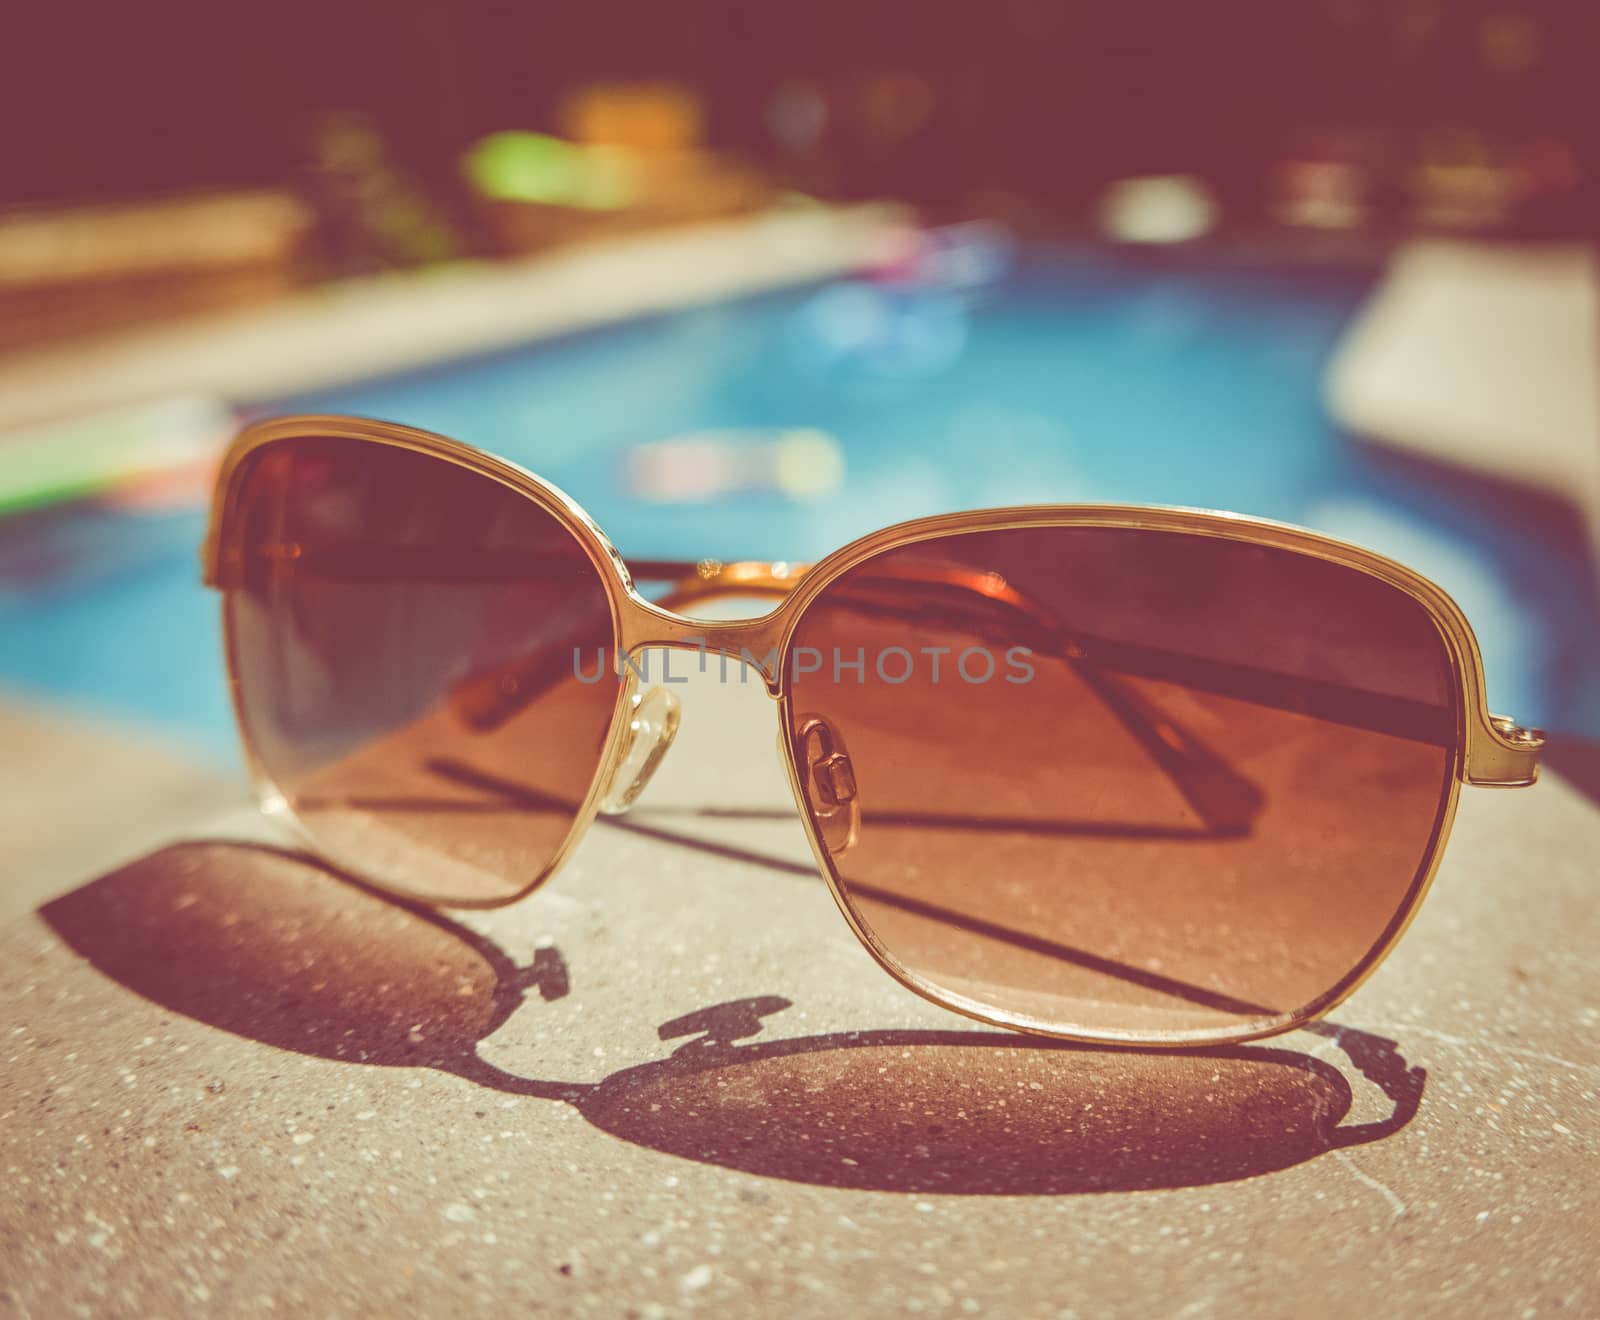 Retro Style Image Of Sunglasses Beside A Swimming Pool